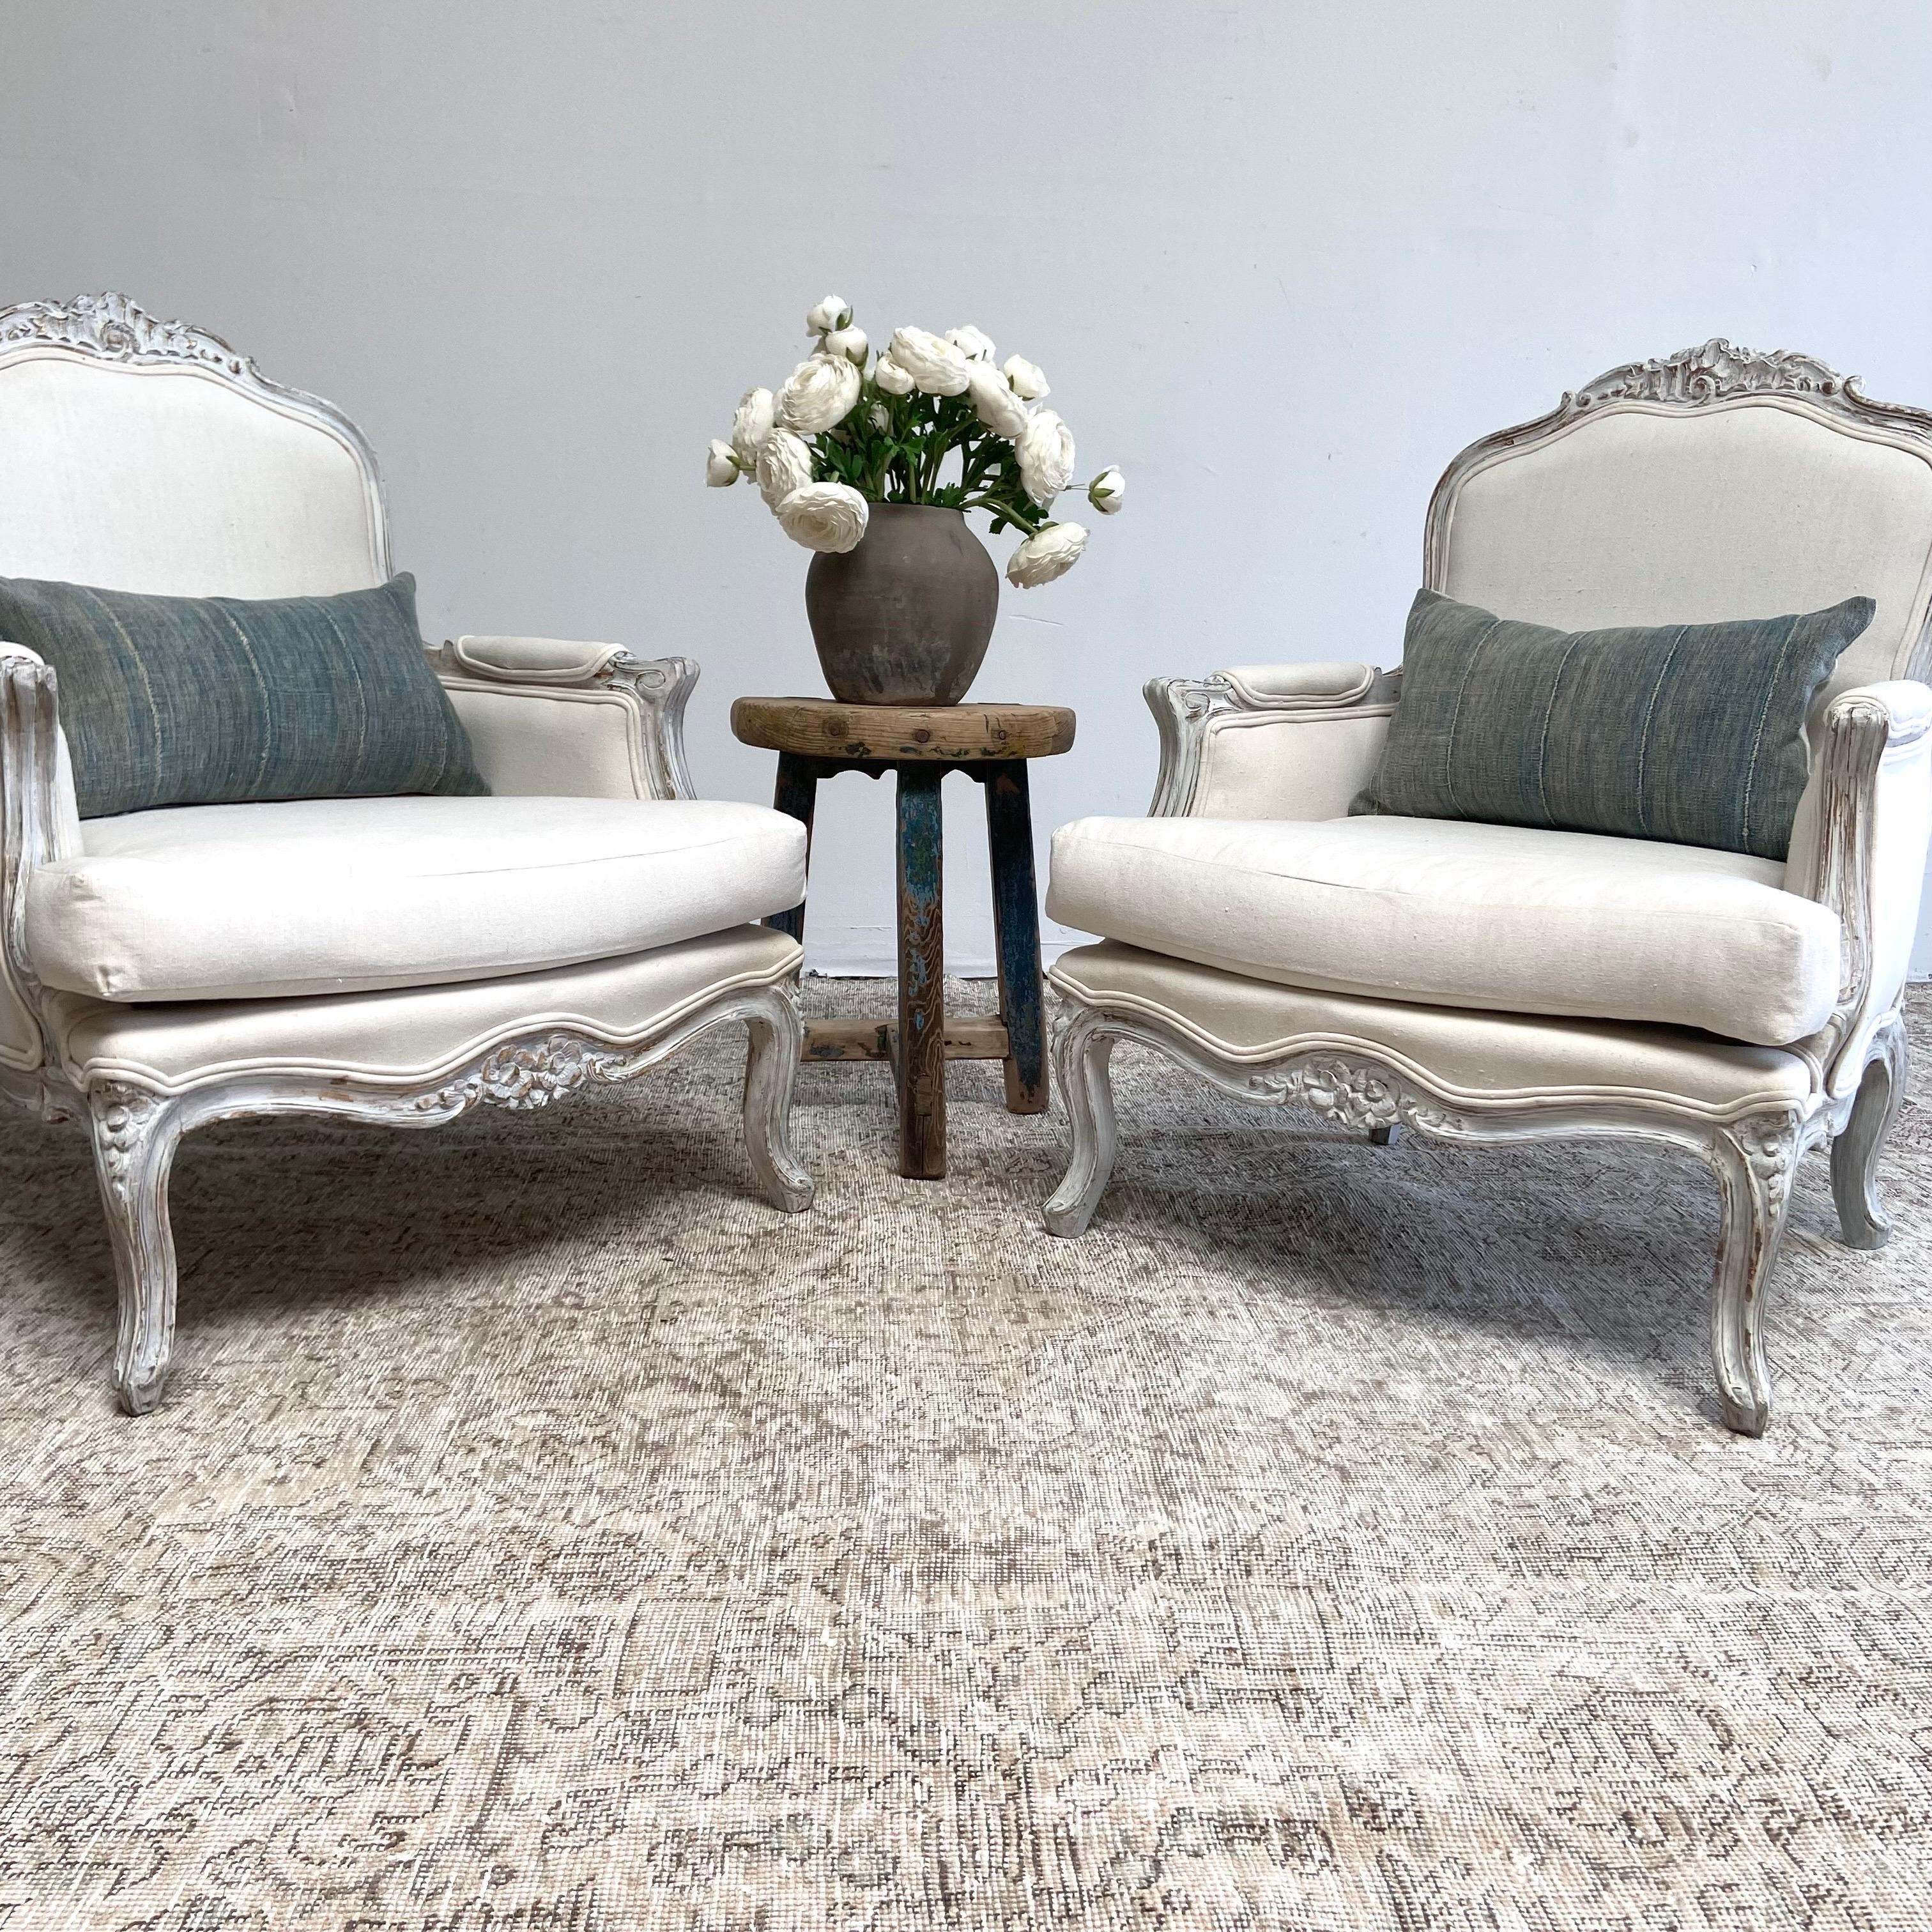 Pair open french style bergere chairs. Louis XV Style with painted gray finish with subtle distressed edges, and cotton upholstery. Legs are solid and sturdy ready for everyday use. These can be reupholstered in any of our linens, velvets, or